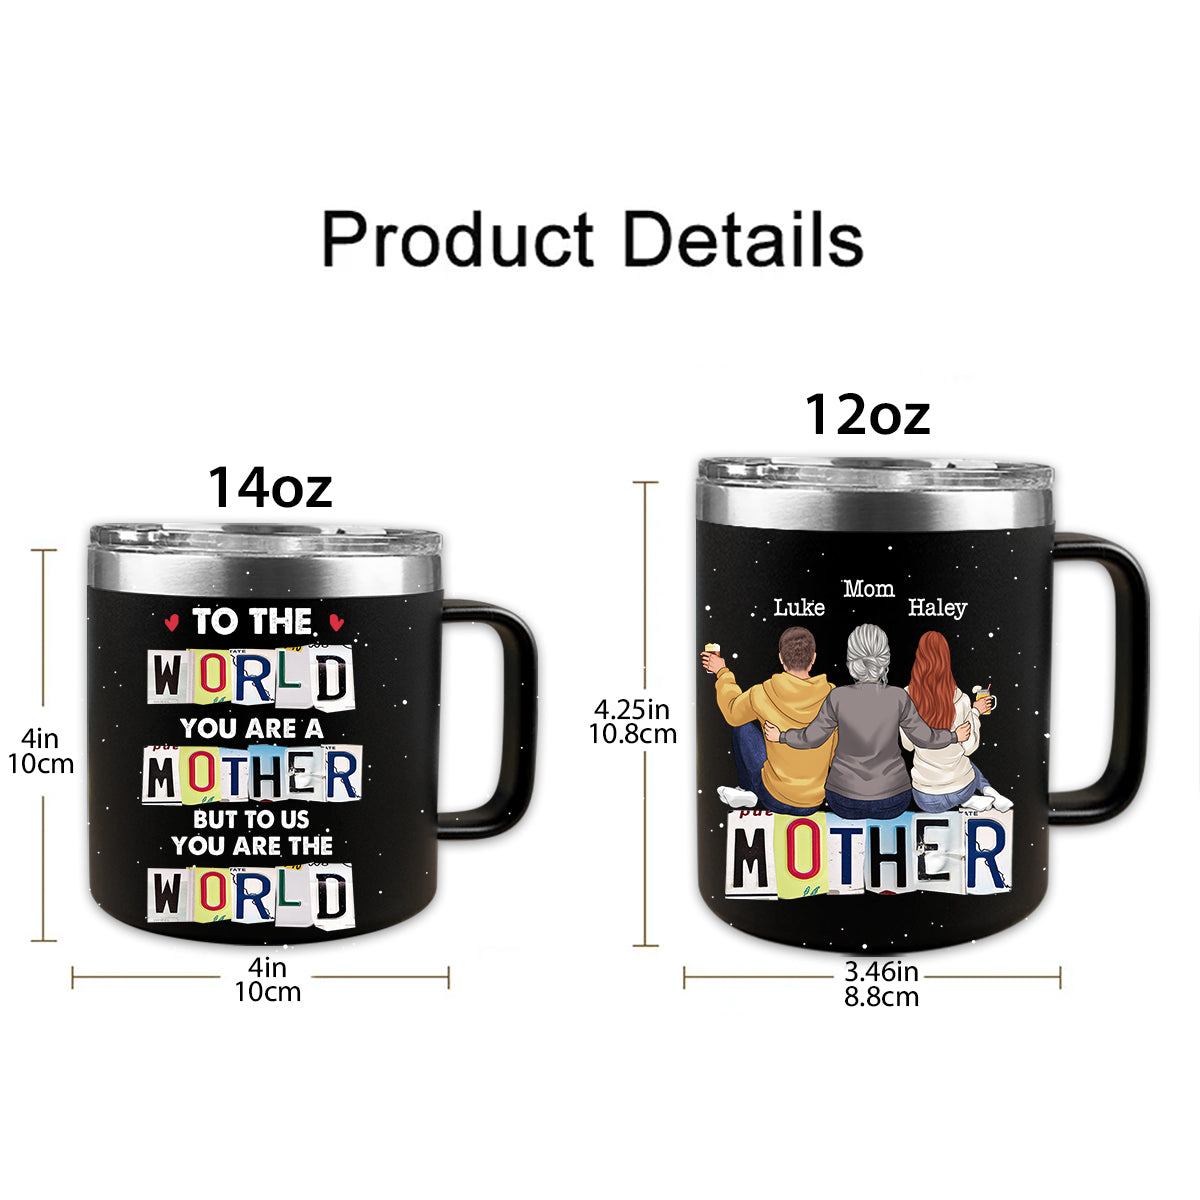 To Me You Are The World - Personalized Mother's Day Father’s Day Insulated Coffee Mug Travel Tumbler